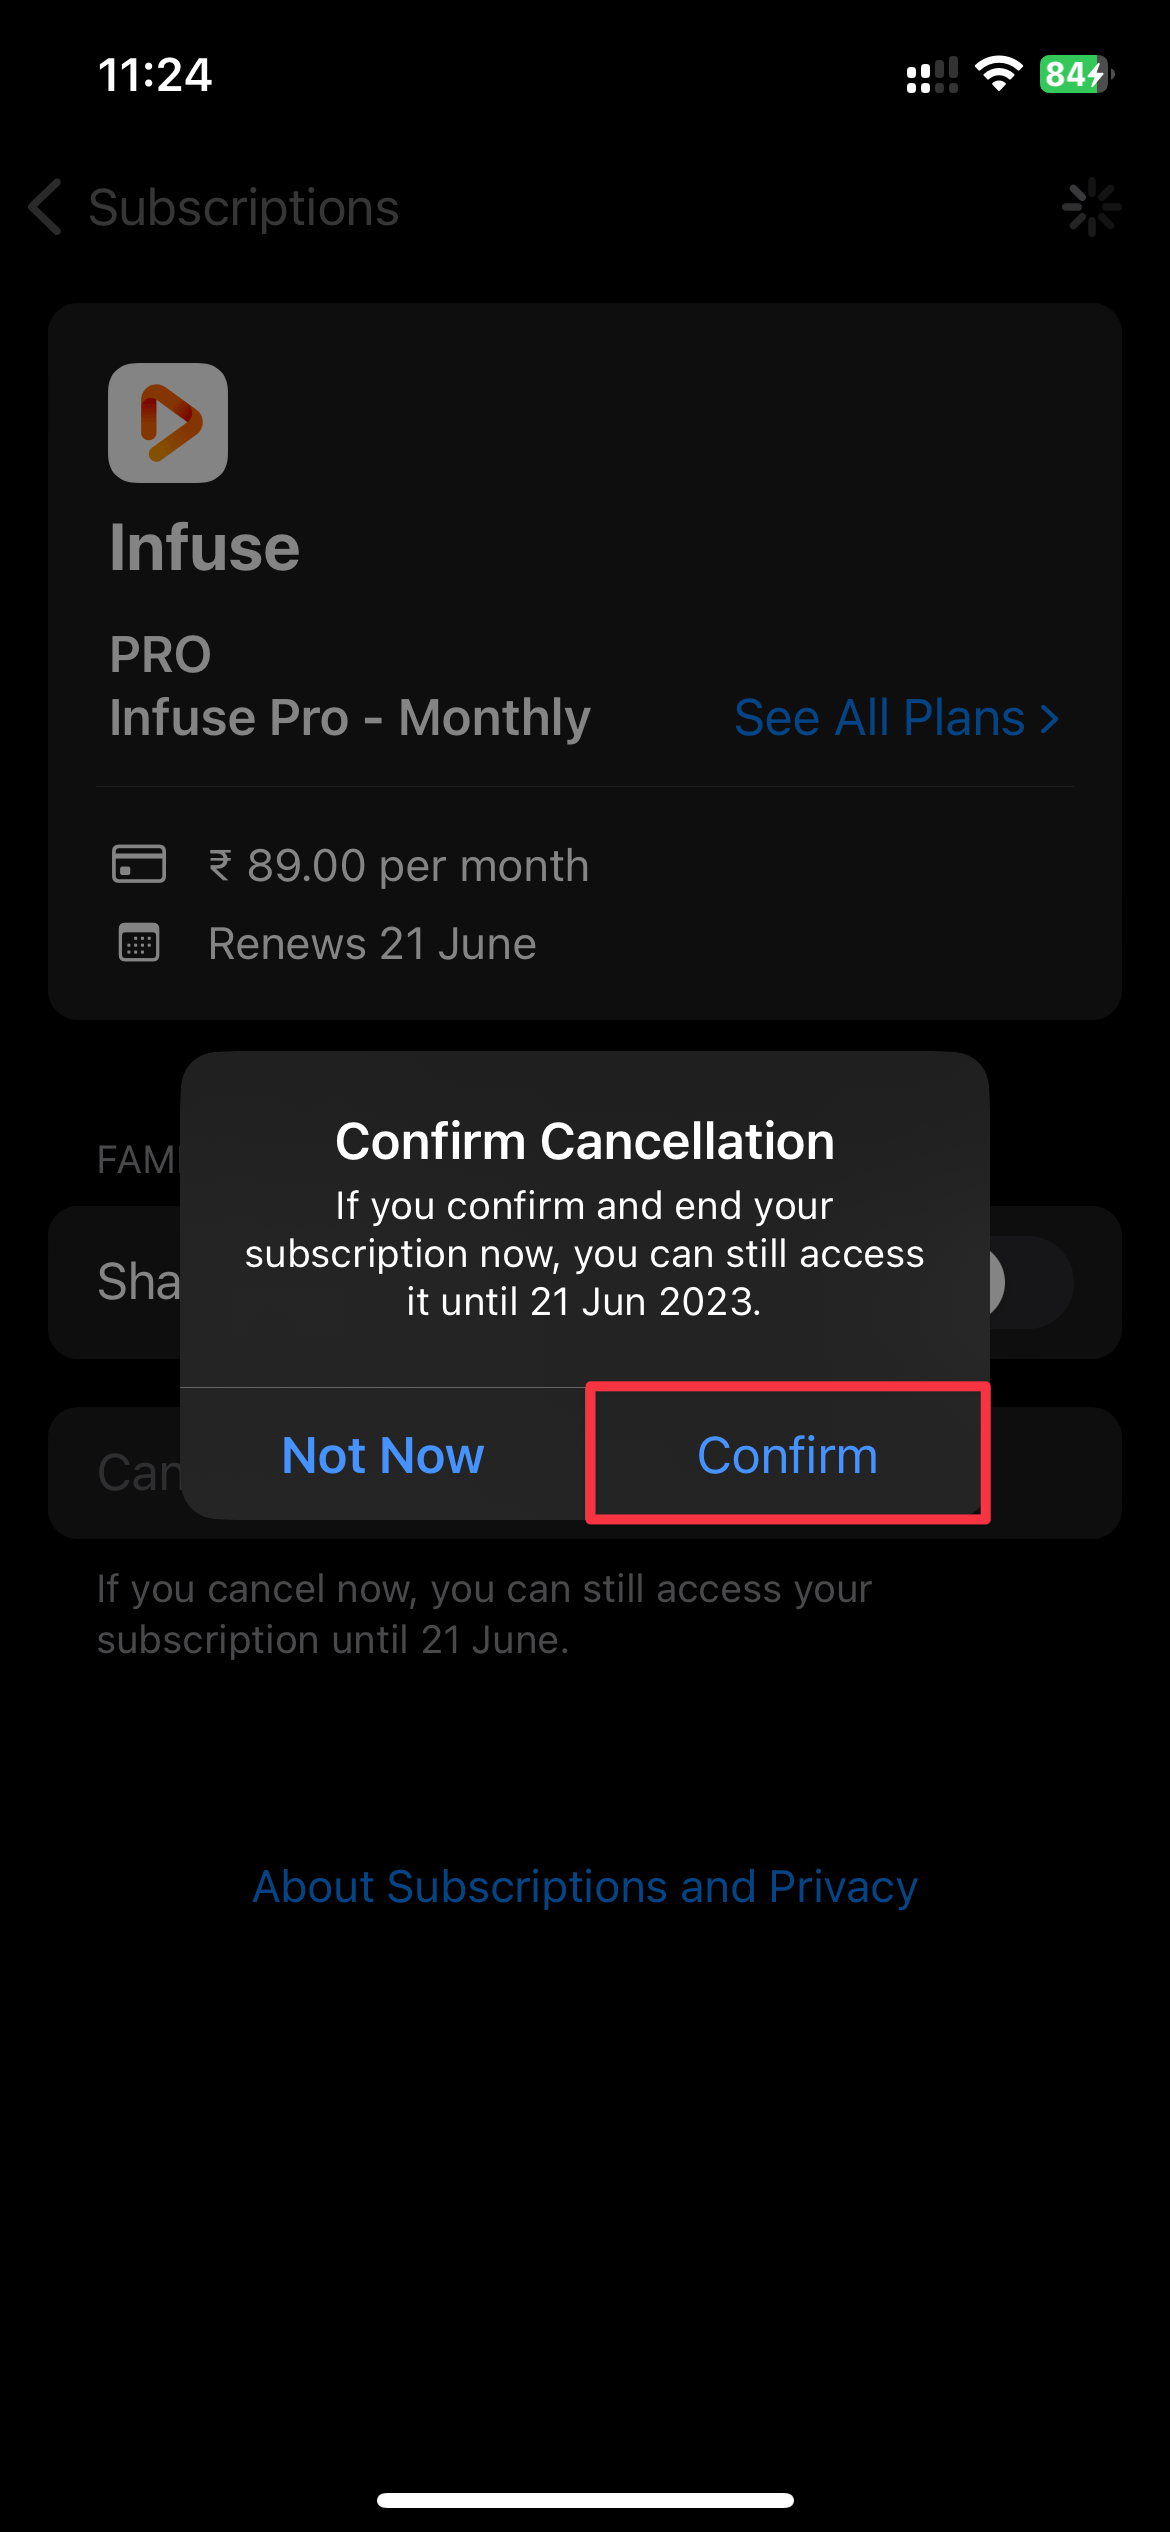 Tap Confirm to cancel the subscription